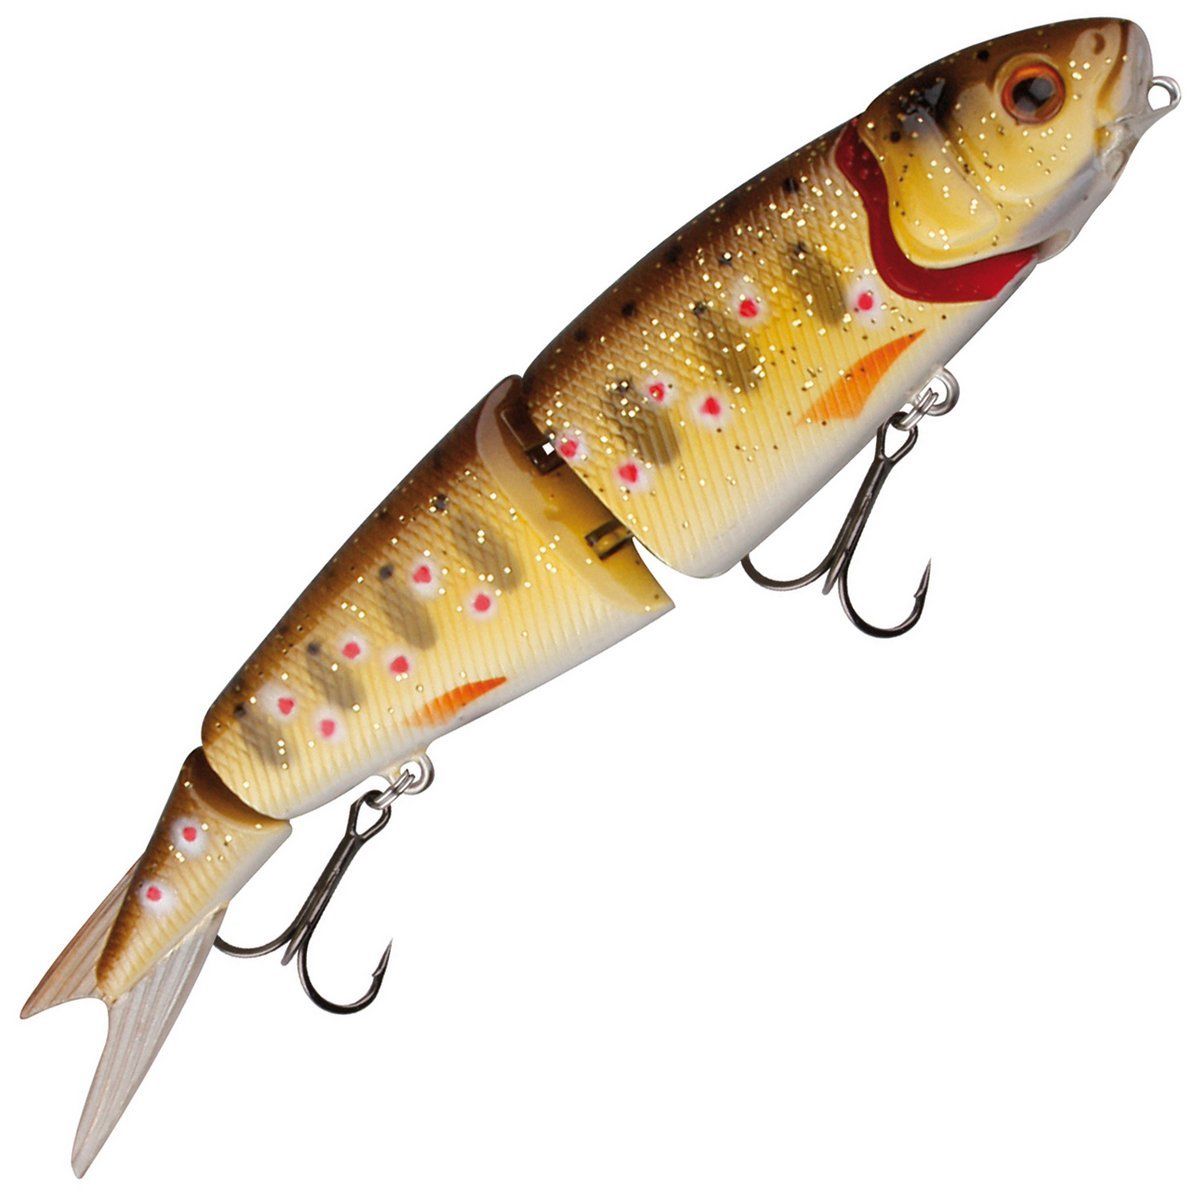 Savage Gear 4Play Herring Slow Sinking Lure 13cm Jointed Swimbait 3/4oz Smolt